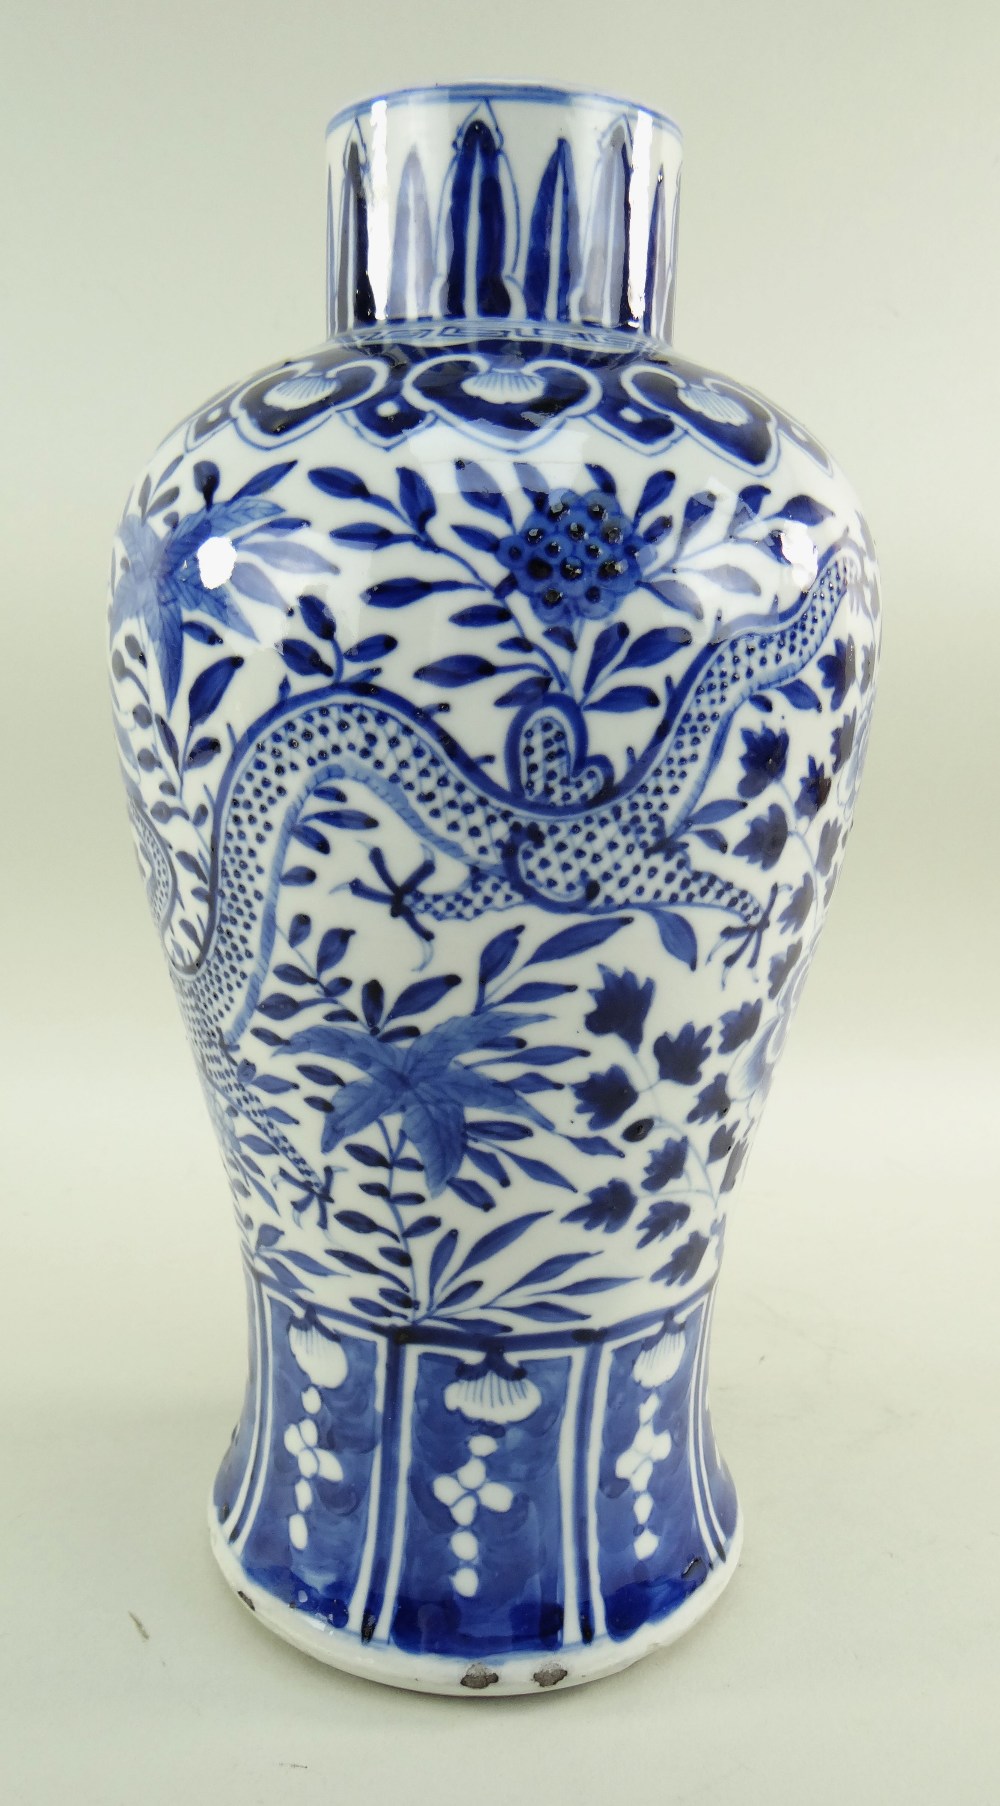 PAIR OF CHINESE BLUE & WHITE PORCELAIN VASES, Kangxi mark but later, baluster form with straight - Image 3 of 6